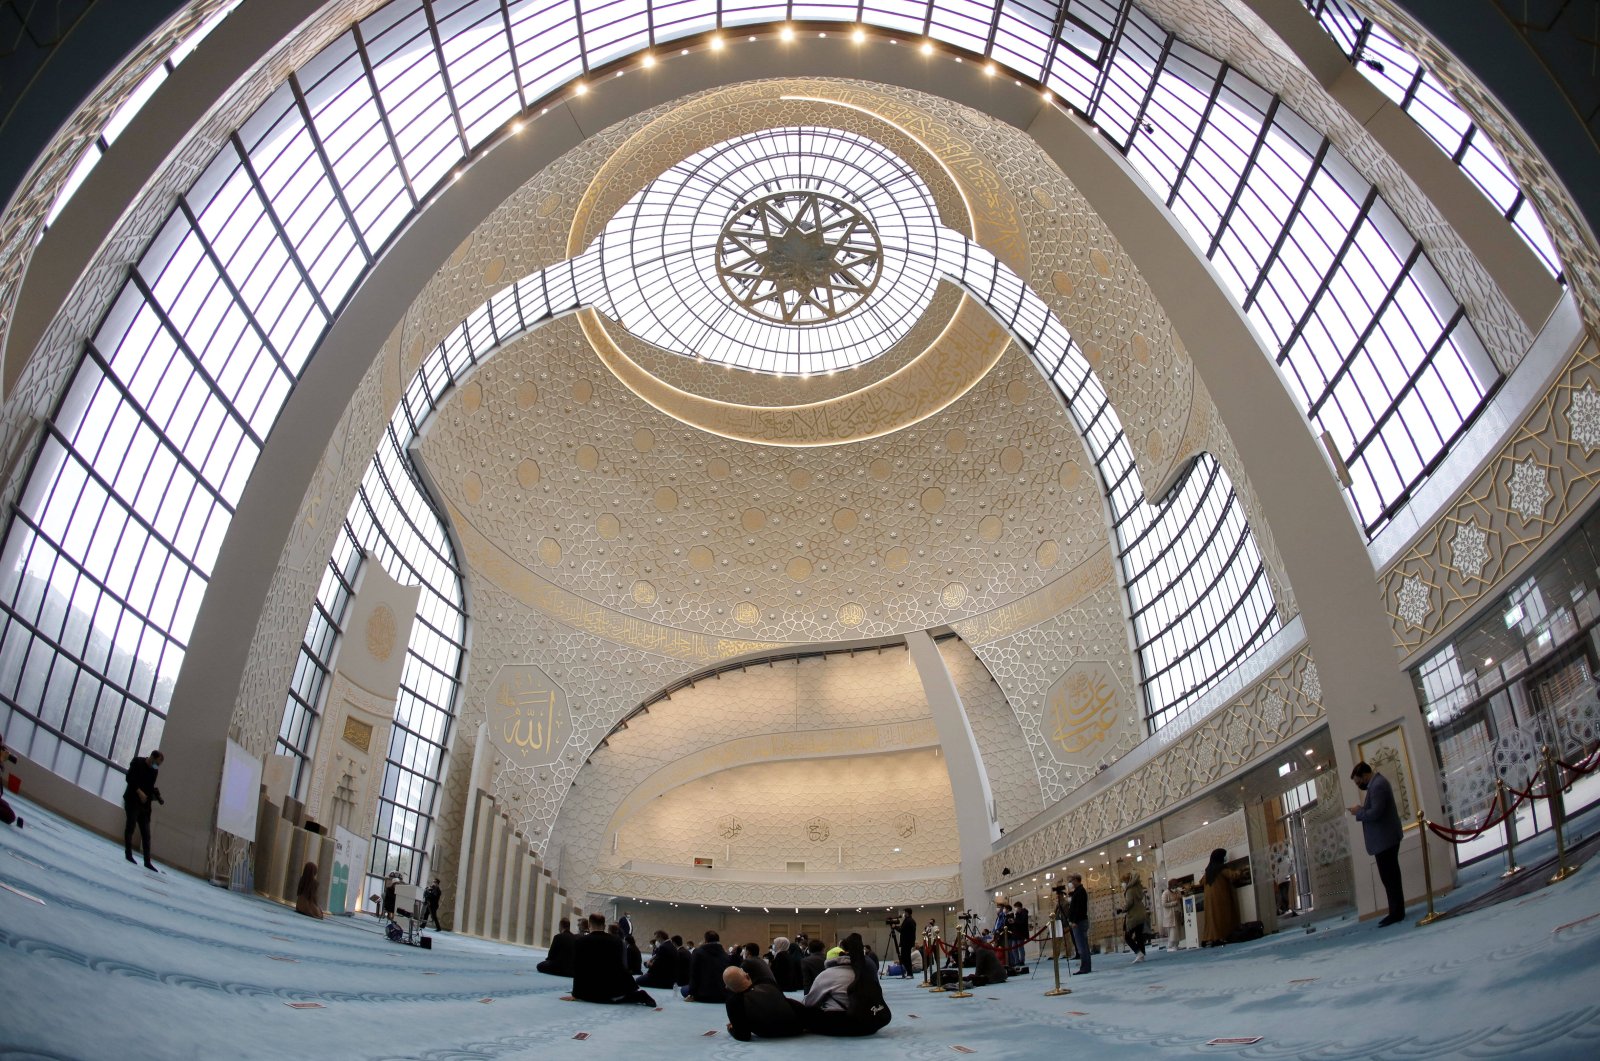 The interior of the DITIB Central Mosque in Ehrenfeld Cologne, Germany. Oct. 3, 2021. (Reuters File Photo)